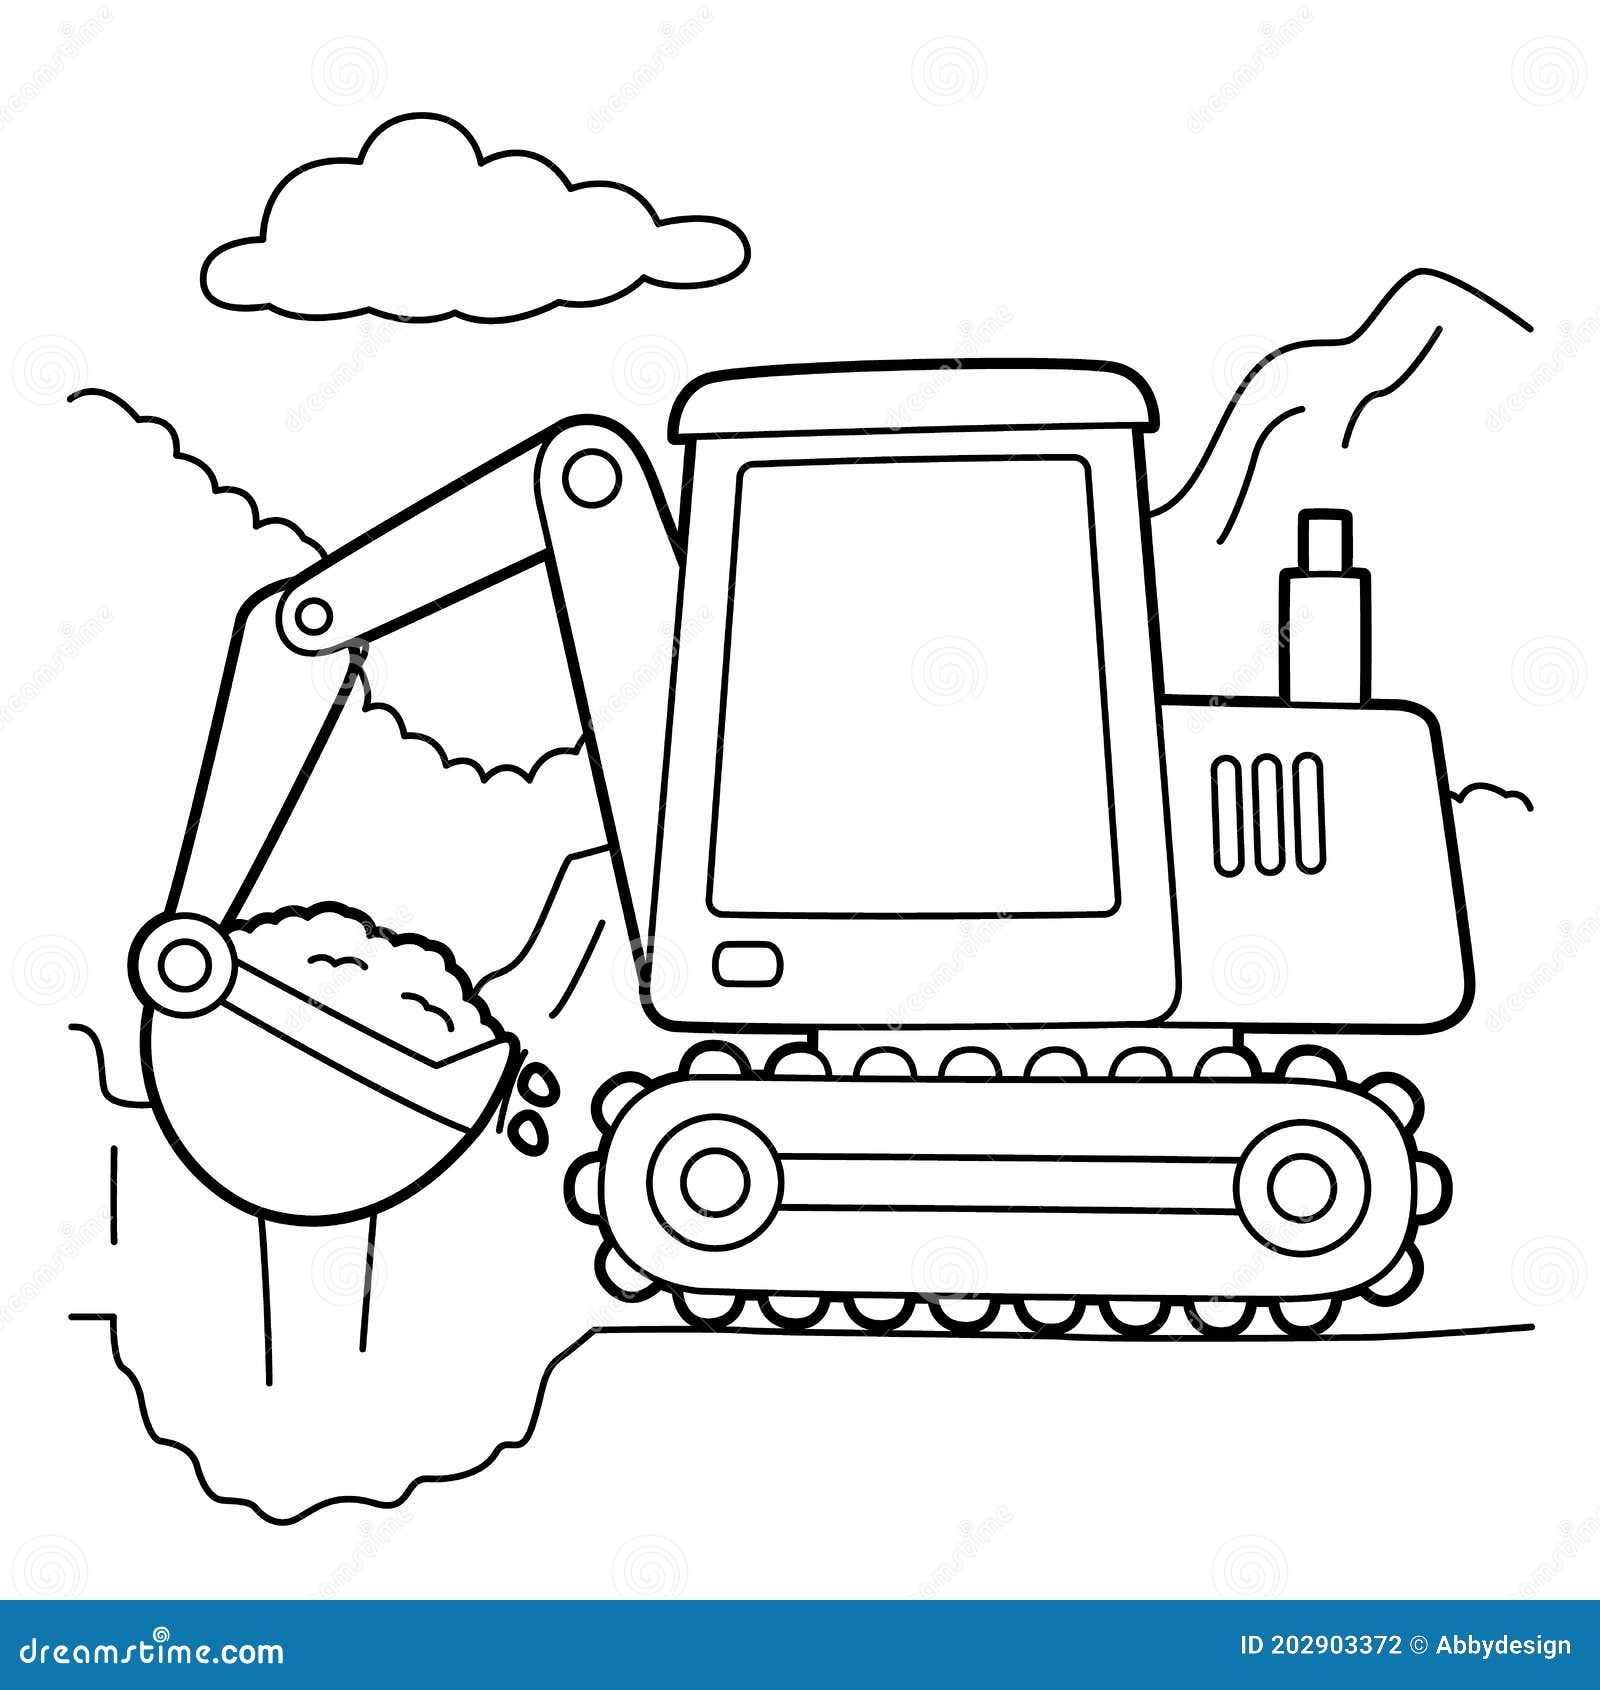 Excavator Coloring Page stock vector. Illustration of excavation ...